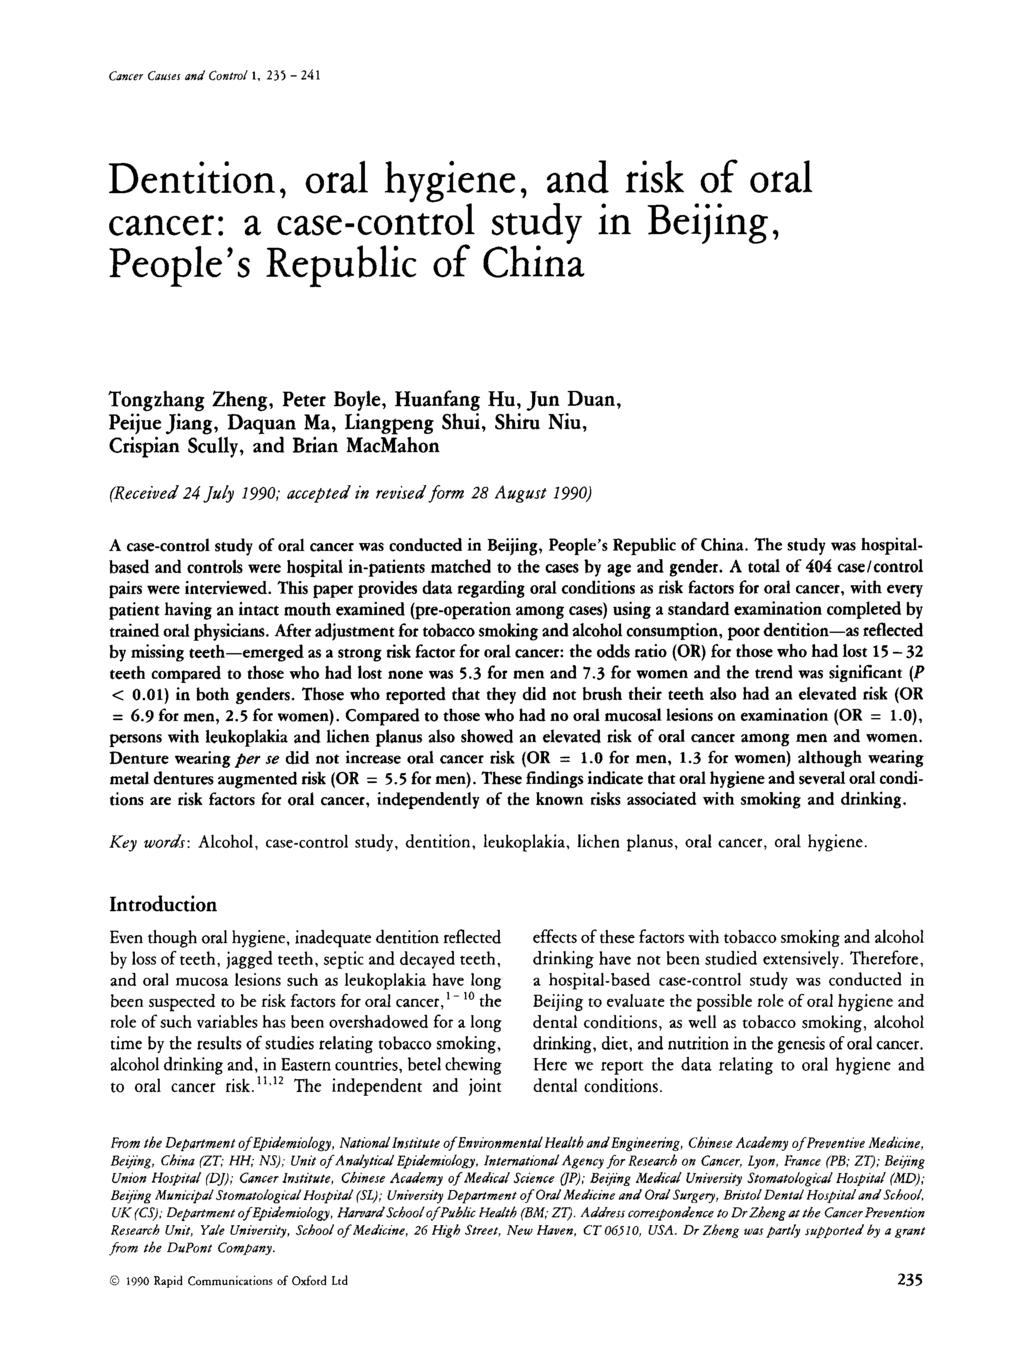 Cancer Causes and Control 1, 235-241 Dentition, oral hygiene, and risk of oral cancer: a case-control study in Beijing, People's Republic of China Tongzhang Zheng, Peter Boyle, Huanfang Hu, Jun Duan,